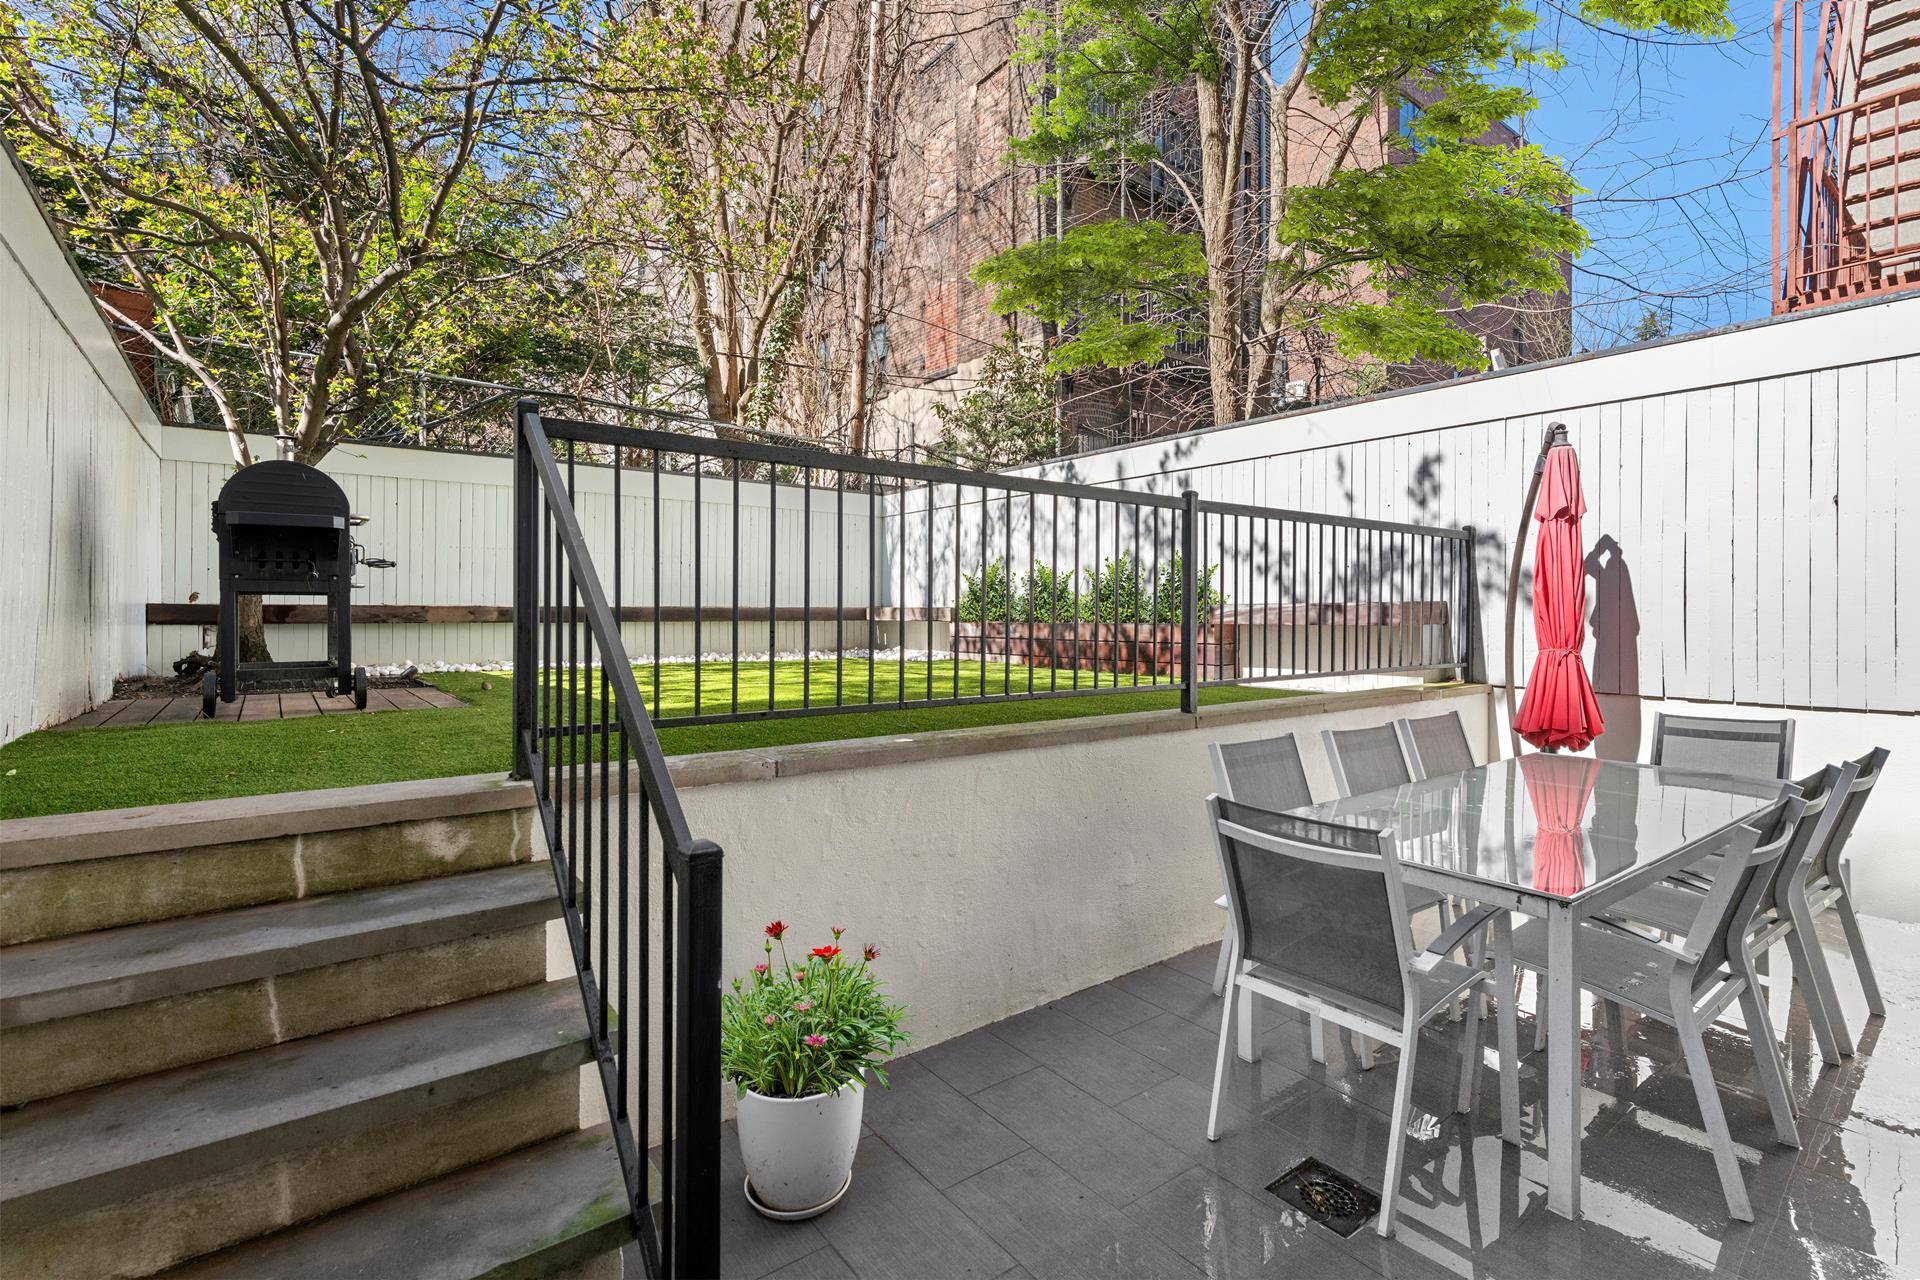 Your search is over Nearly 700 square feet of manicured private outdoor space is here !